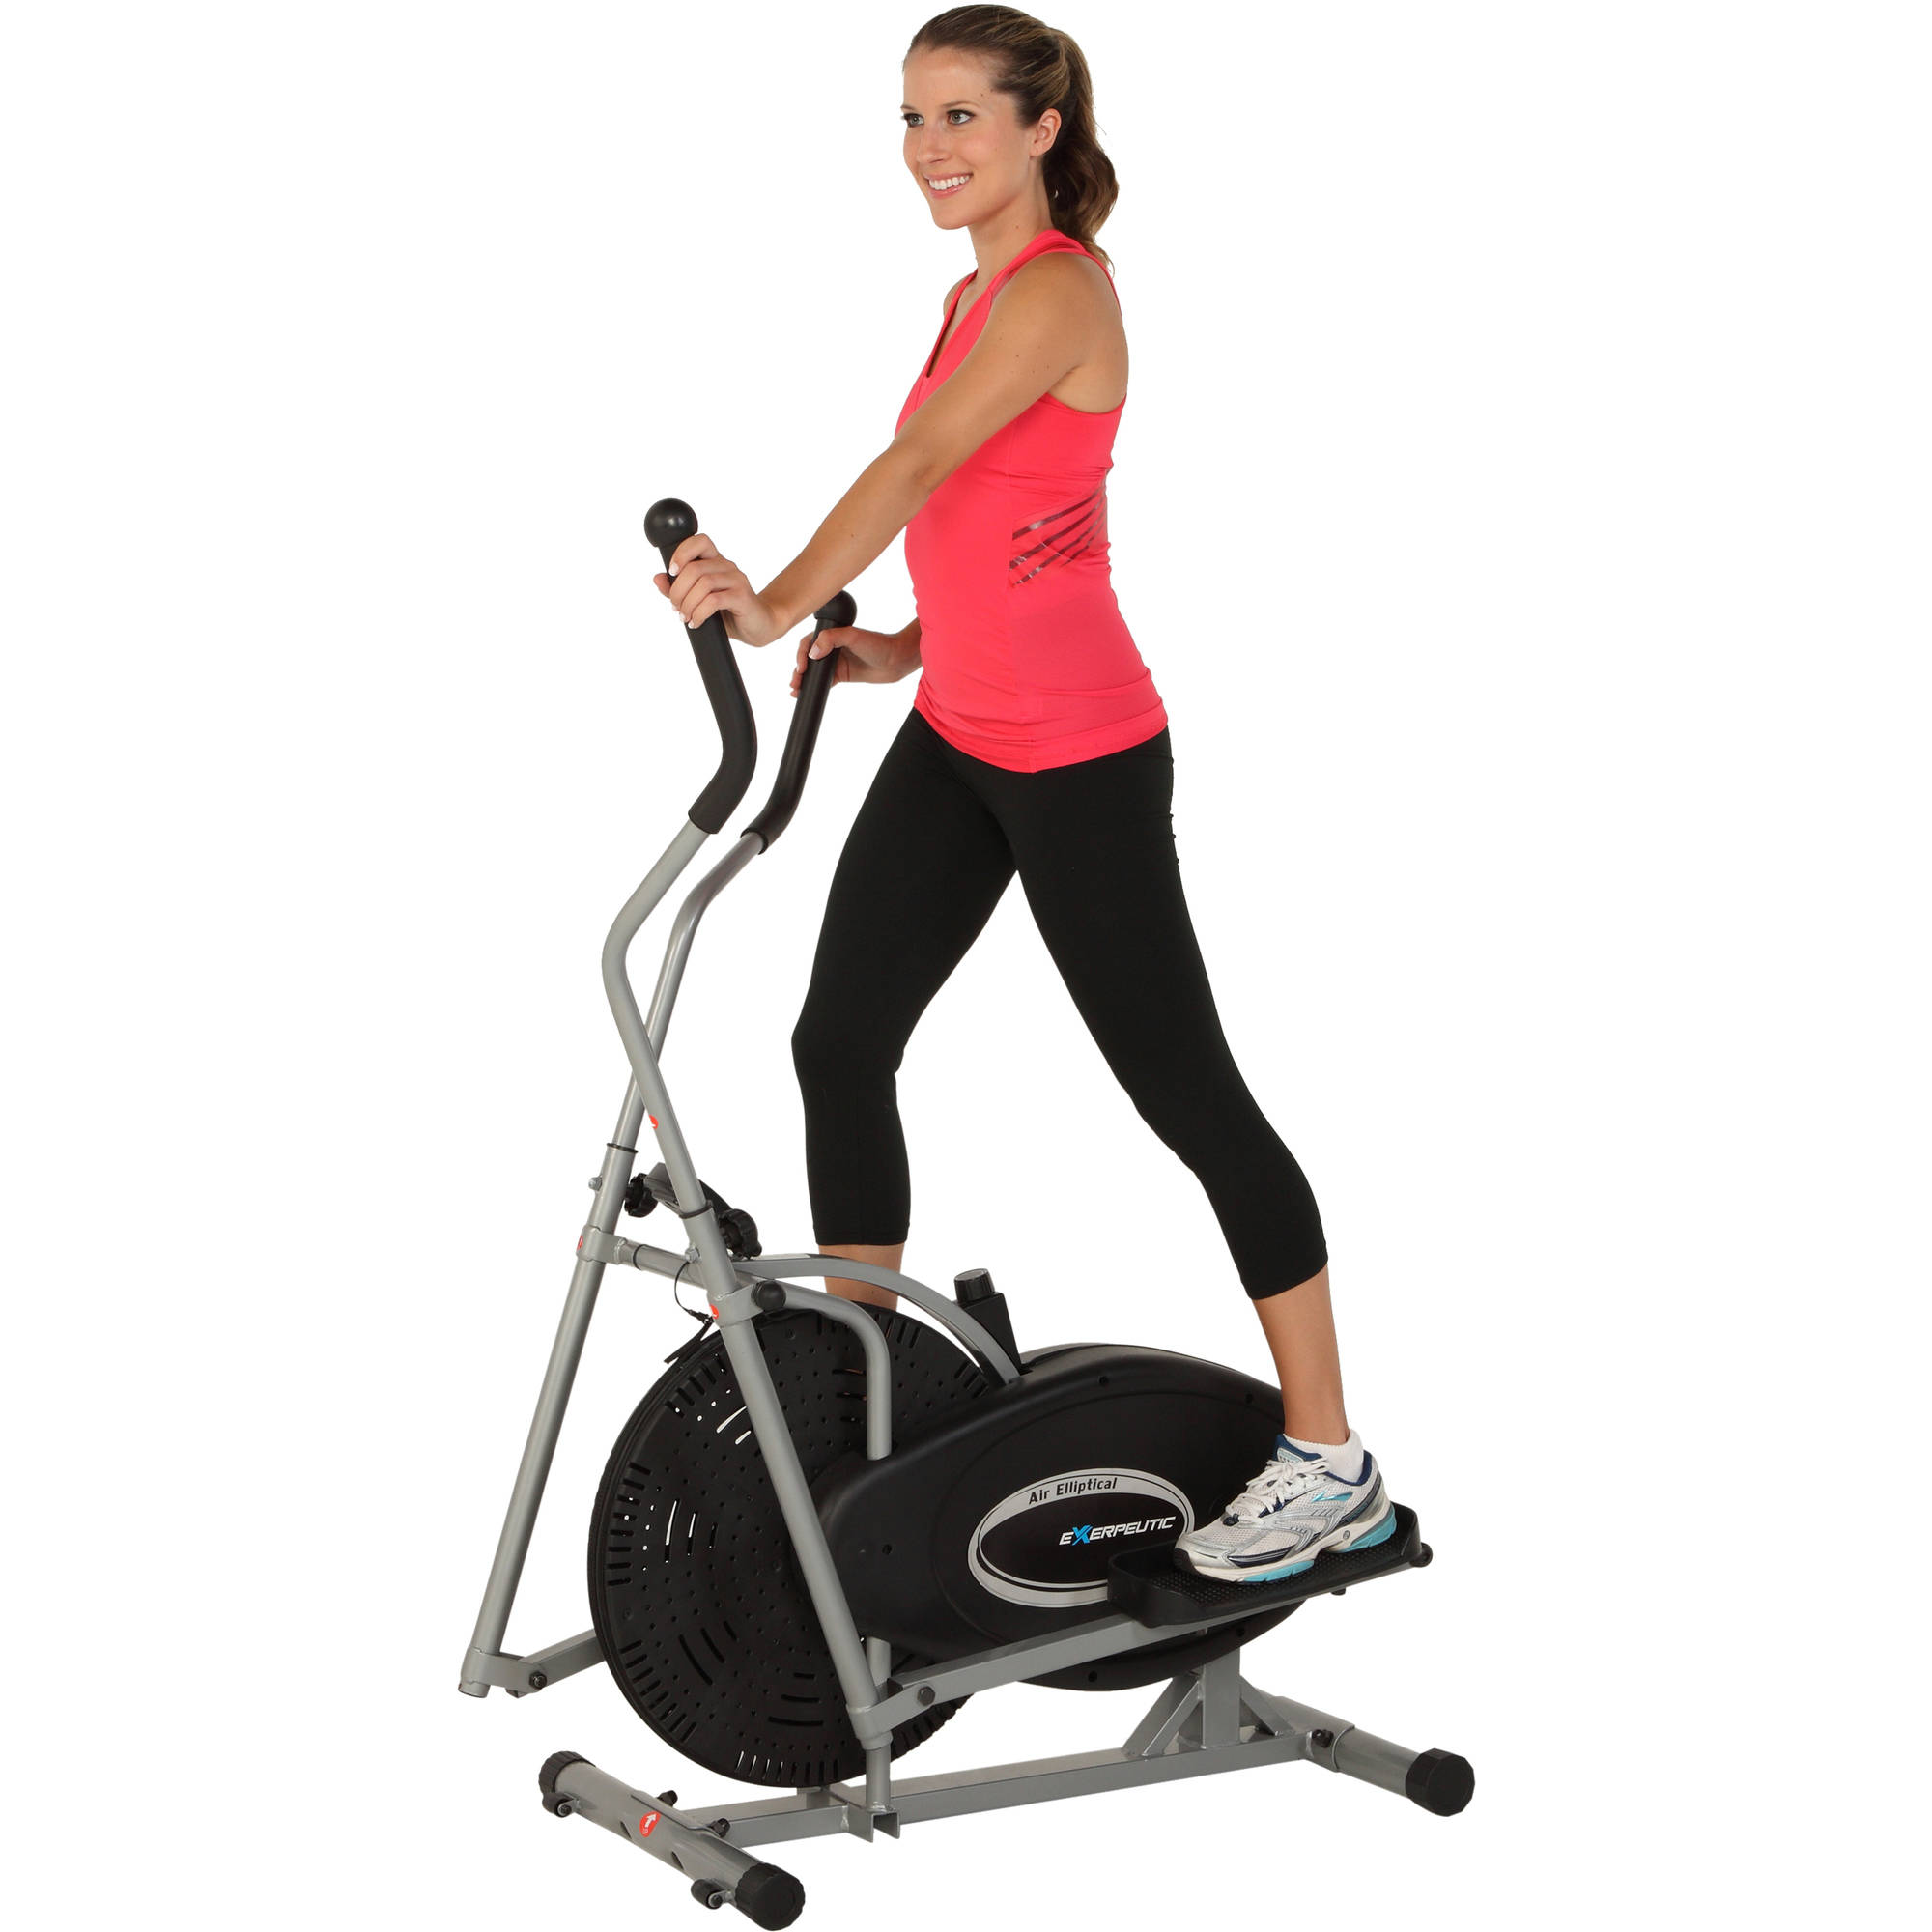 Exerpeutic 260 Air Elliptical with Dual Actions Arms - image 4 of 11